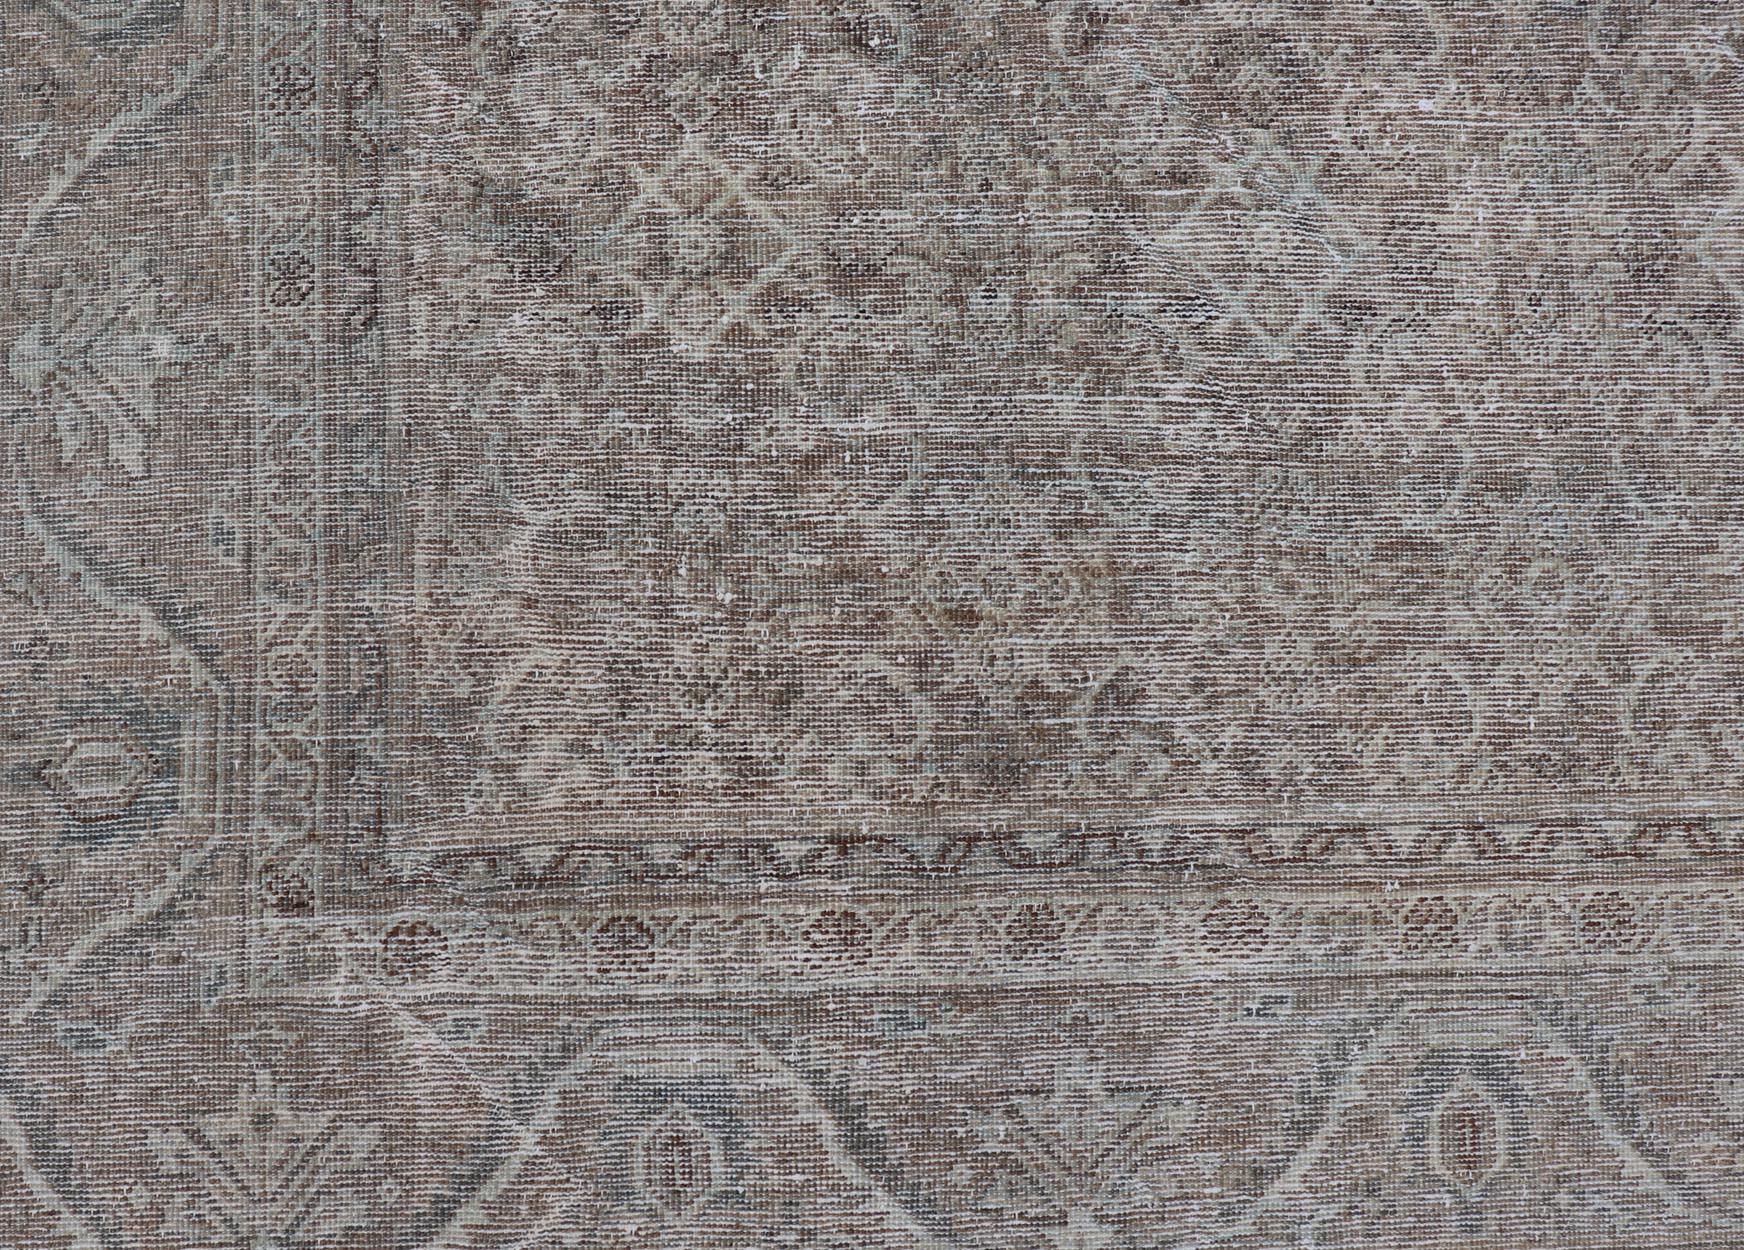 Antique Persian Distressed Mahal Rug in Warm Earthy Tones with All-Over Design 6